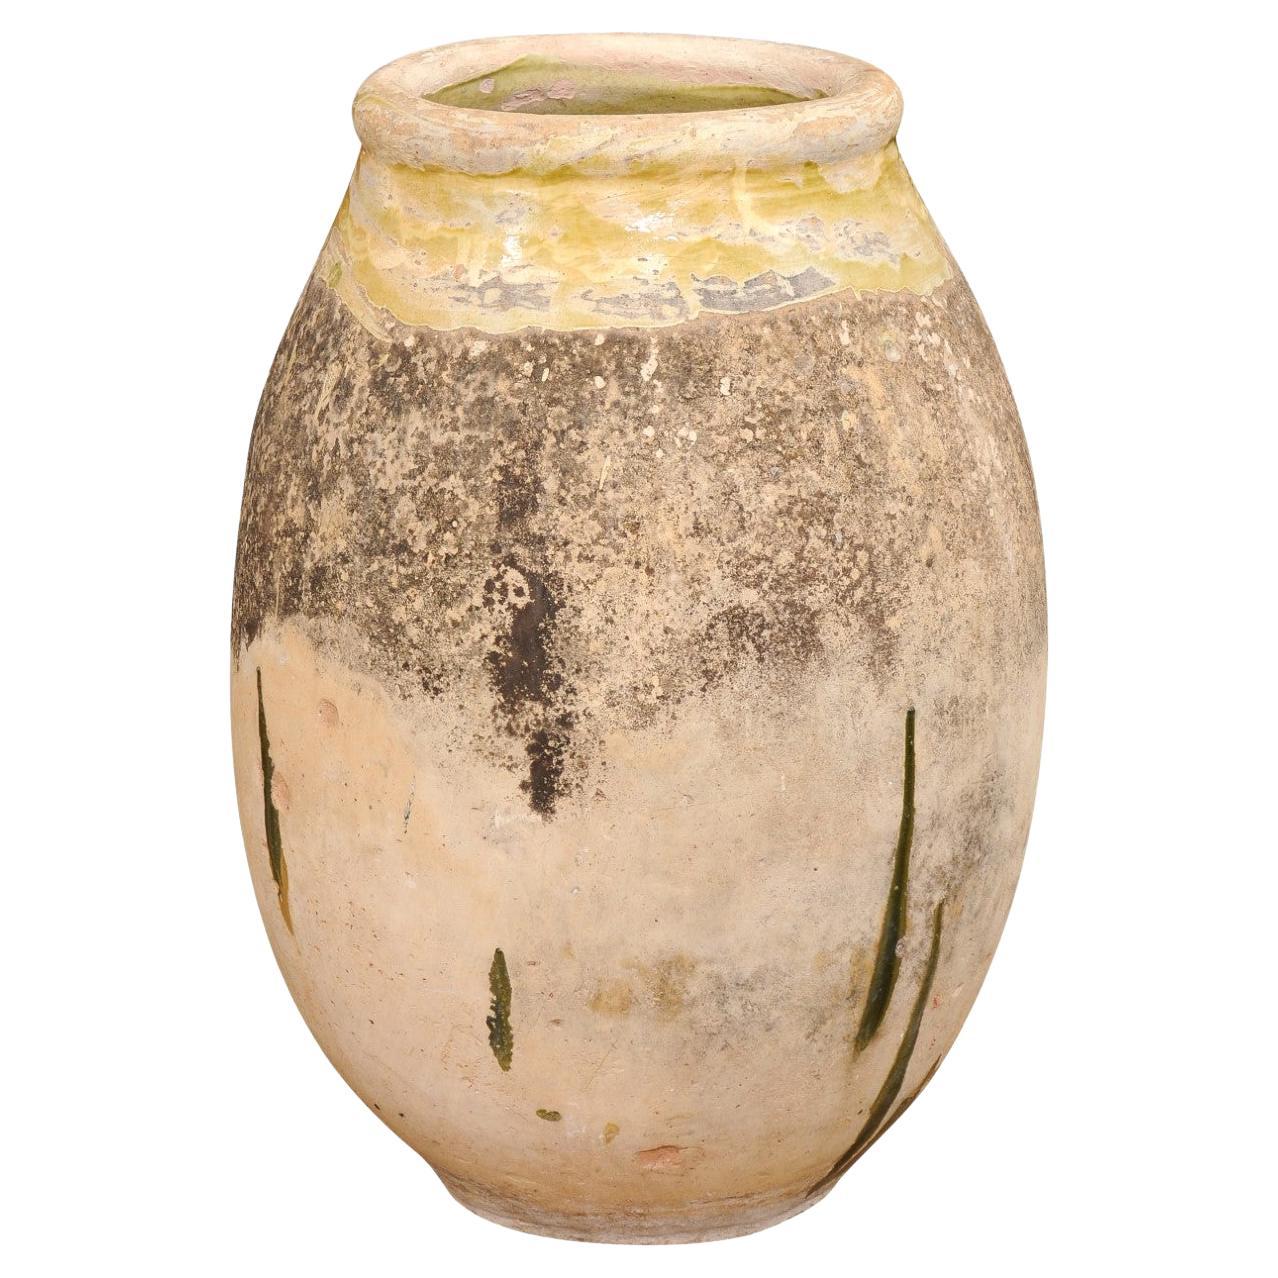 French 19th Century Terracotta Biot Jar with Yellow Glaze and Rustic Character For Sale